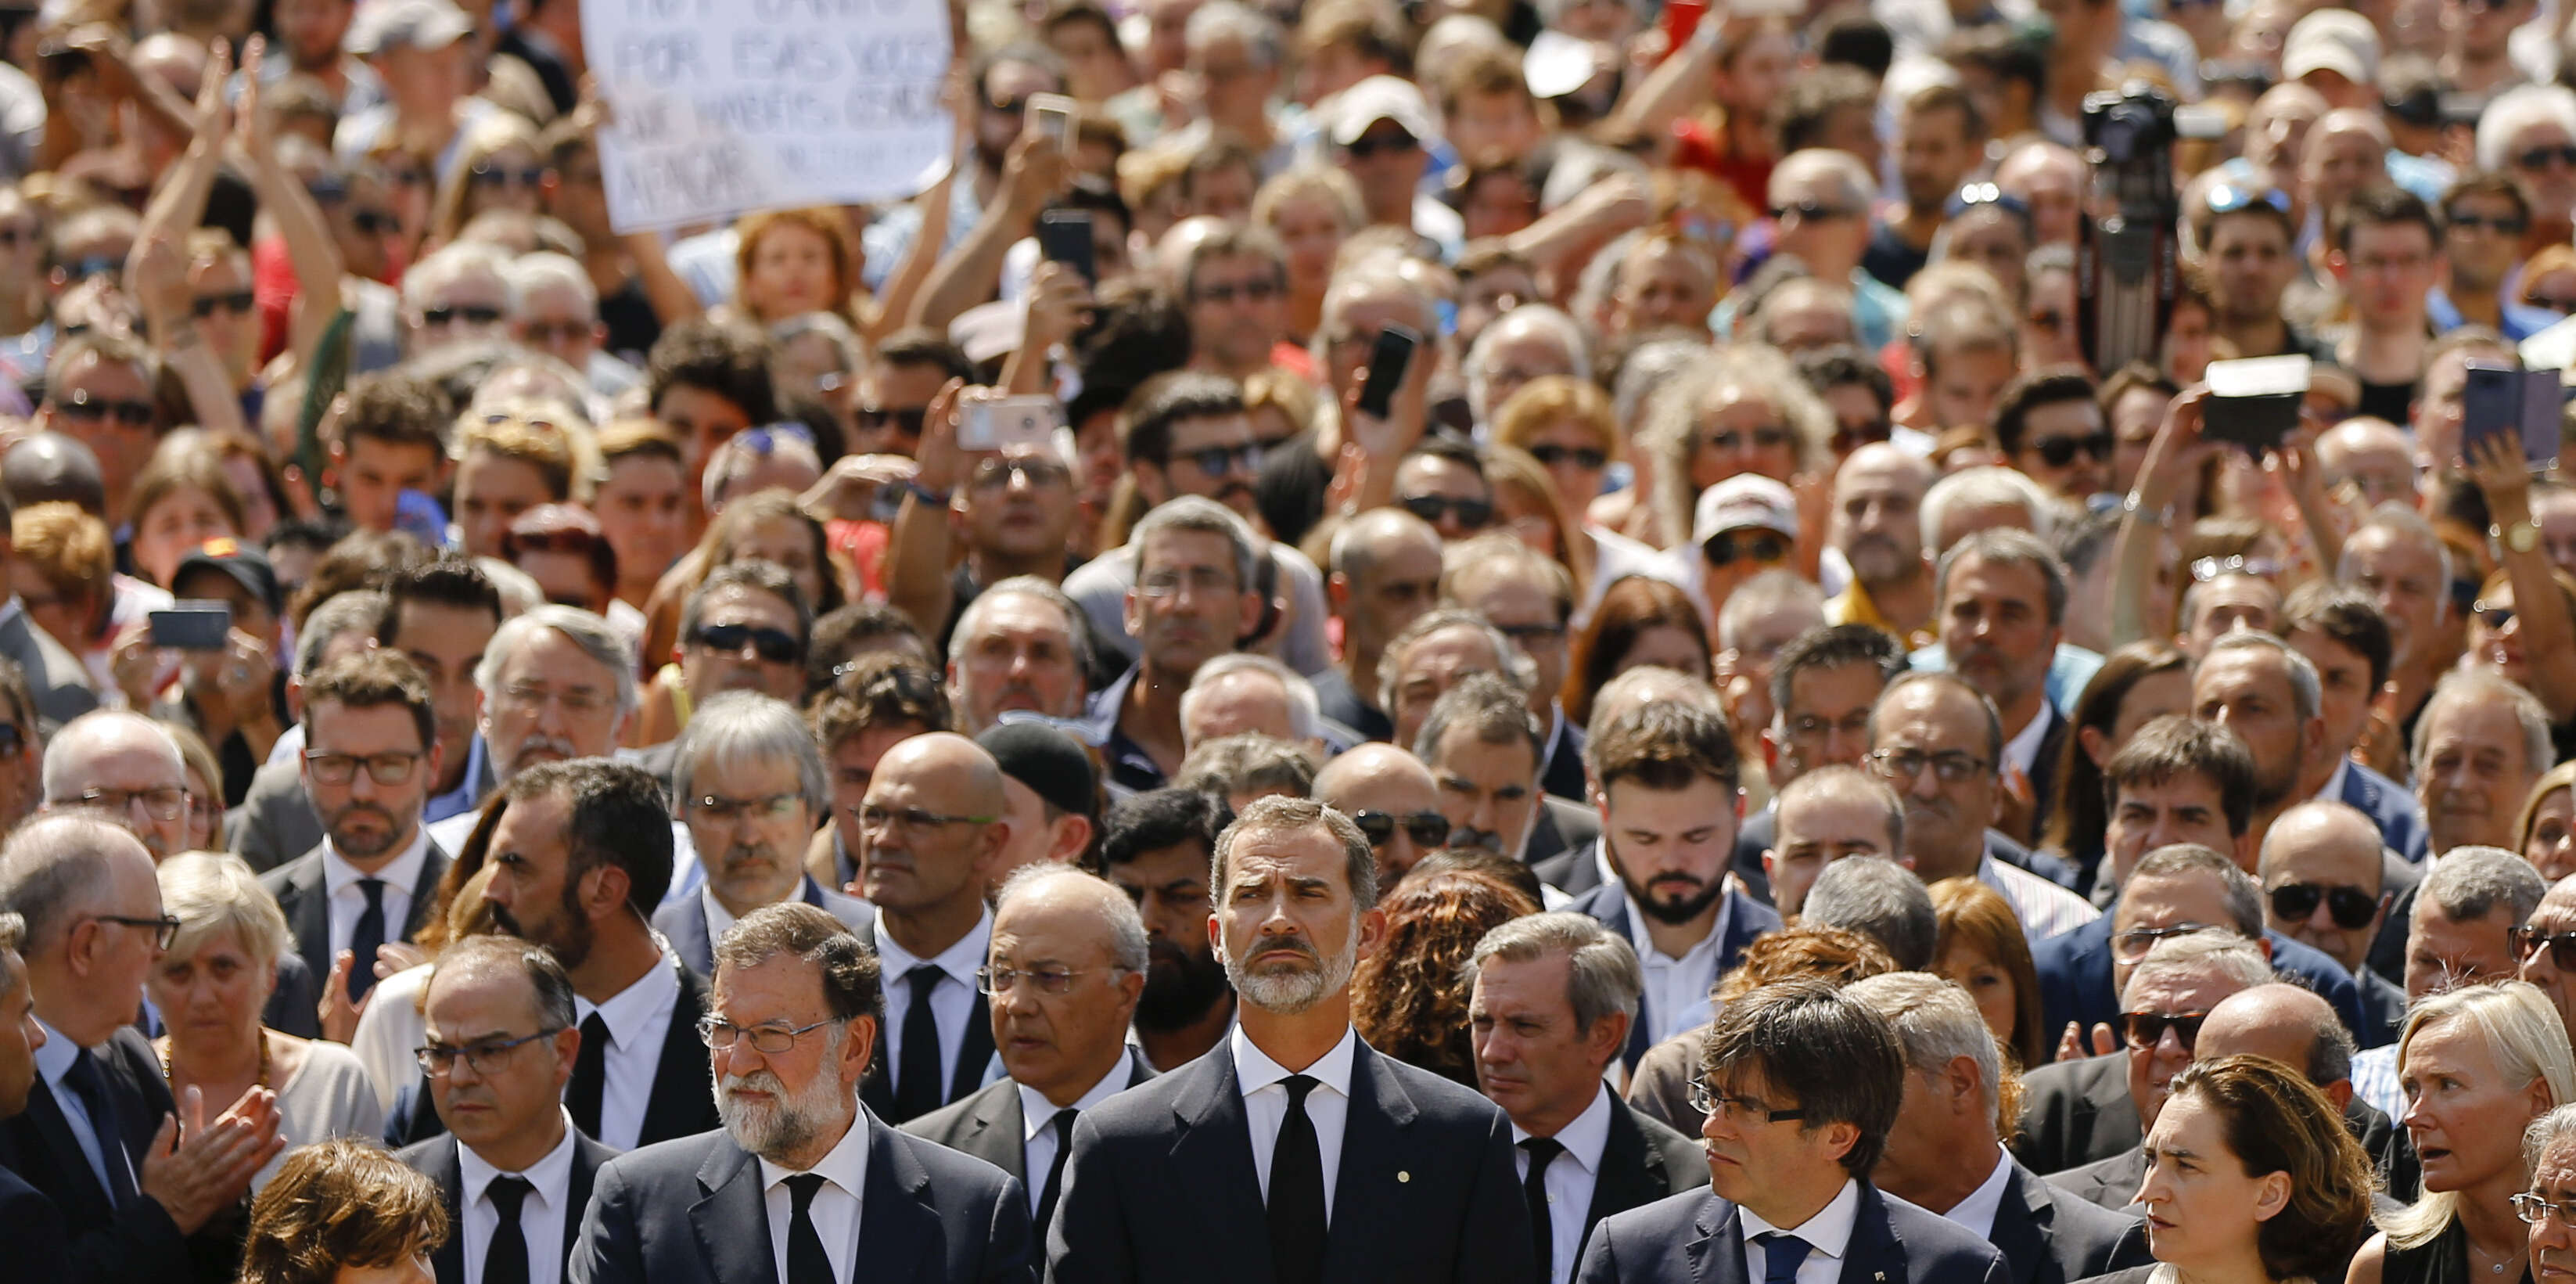 King Felipe of Spain, center, Prime Minister Mariano Rajoy, center left, and and Catalonia regional President Carles Puigdemont, center right, join people observing a minute of silence in memory of the terrorist attacks victims in Las Ramblas, Barcelona, Spain, Friday, Aug. 18, 2017. Spanish police on Friday shot and killed five people carrying bomb belts who were connected to the Barcelona van attack that killed at least 13, as the manhunt intensified for the perpetrators of Europe's latest rampage claimed by the Islamic State group. (AP Photo/Francisco Seco)